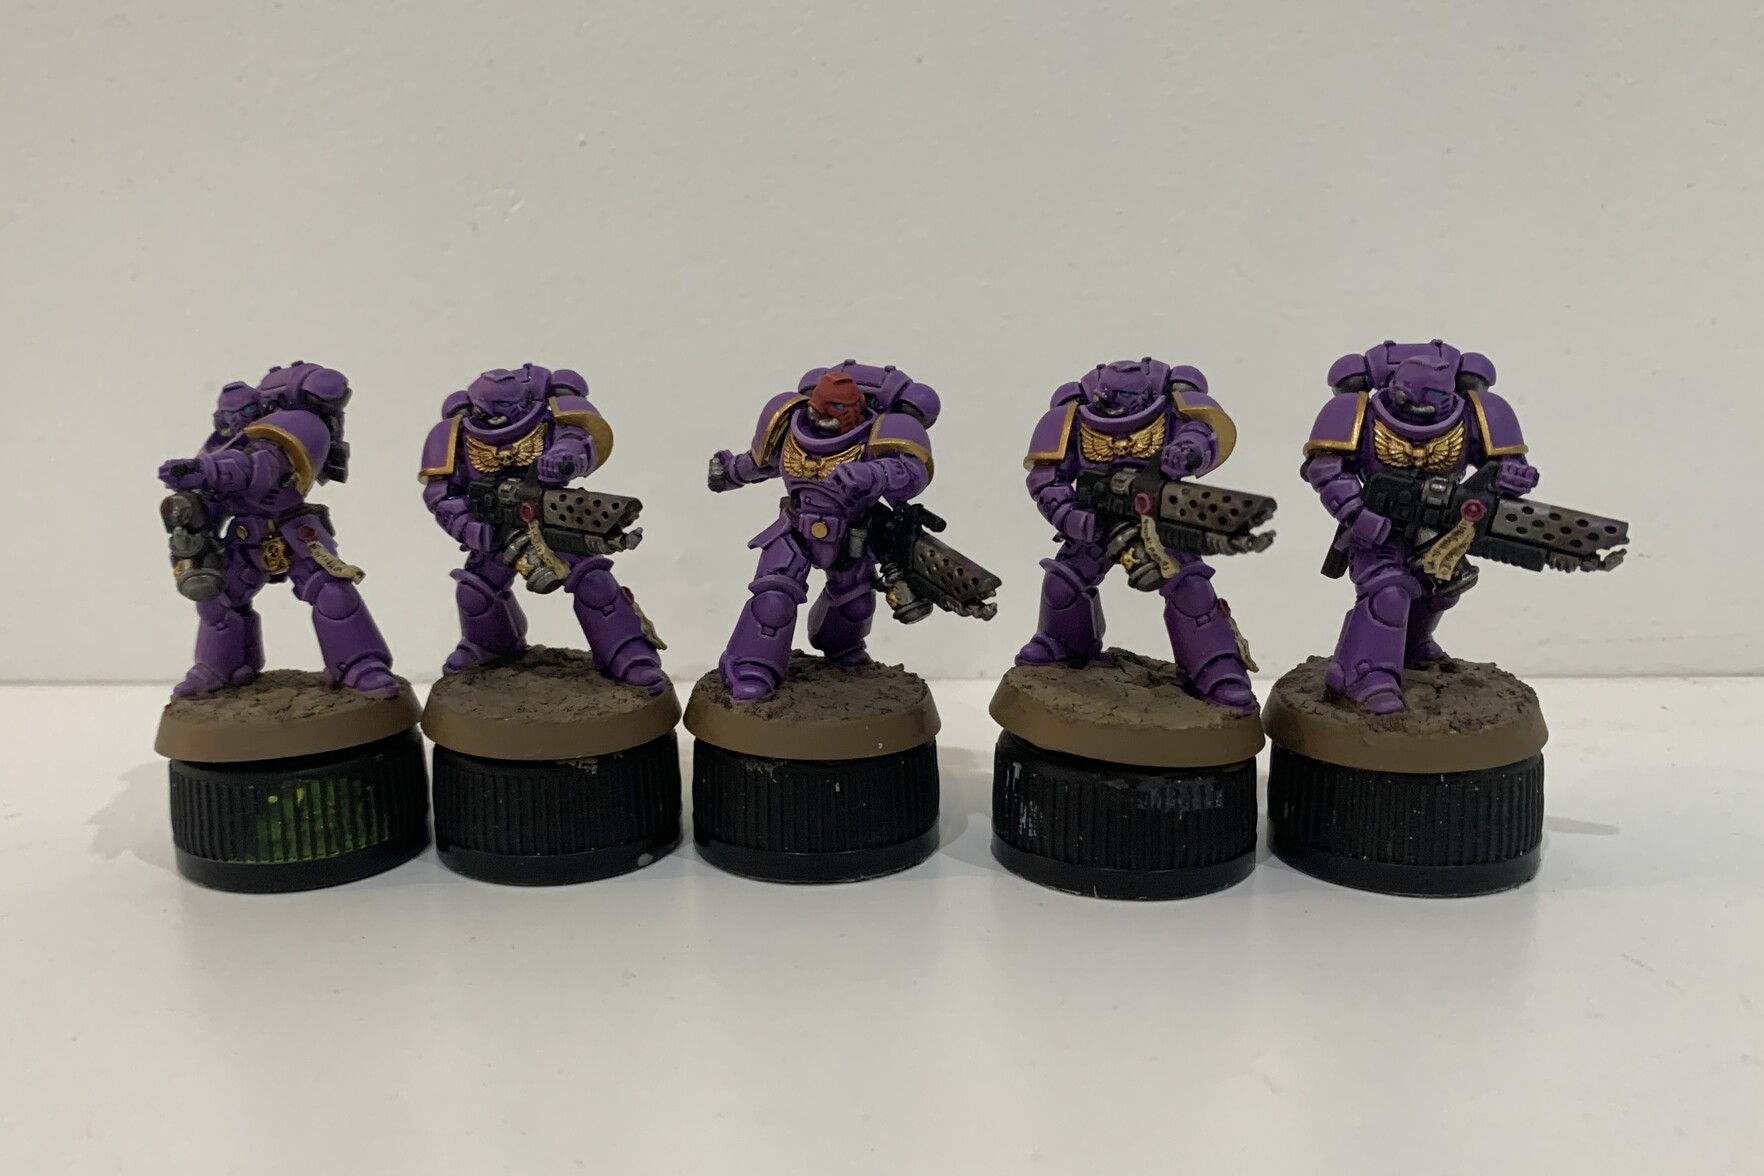 Five Infernus Space Marines standing side by side. Their main armour is painted in a pinky-purple colour scheme with gold trimming. The four outer Marines are holding flame weapons with the central marine throwing a grenade.